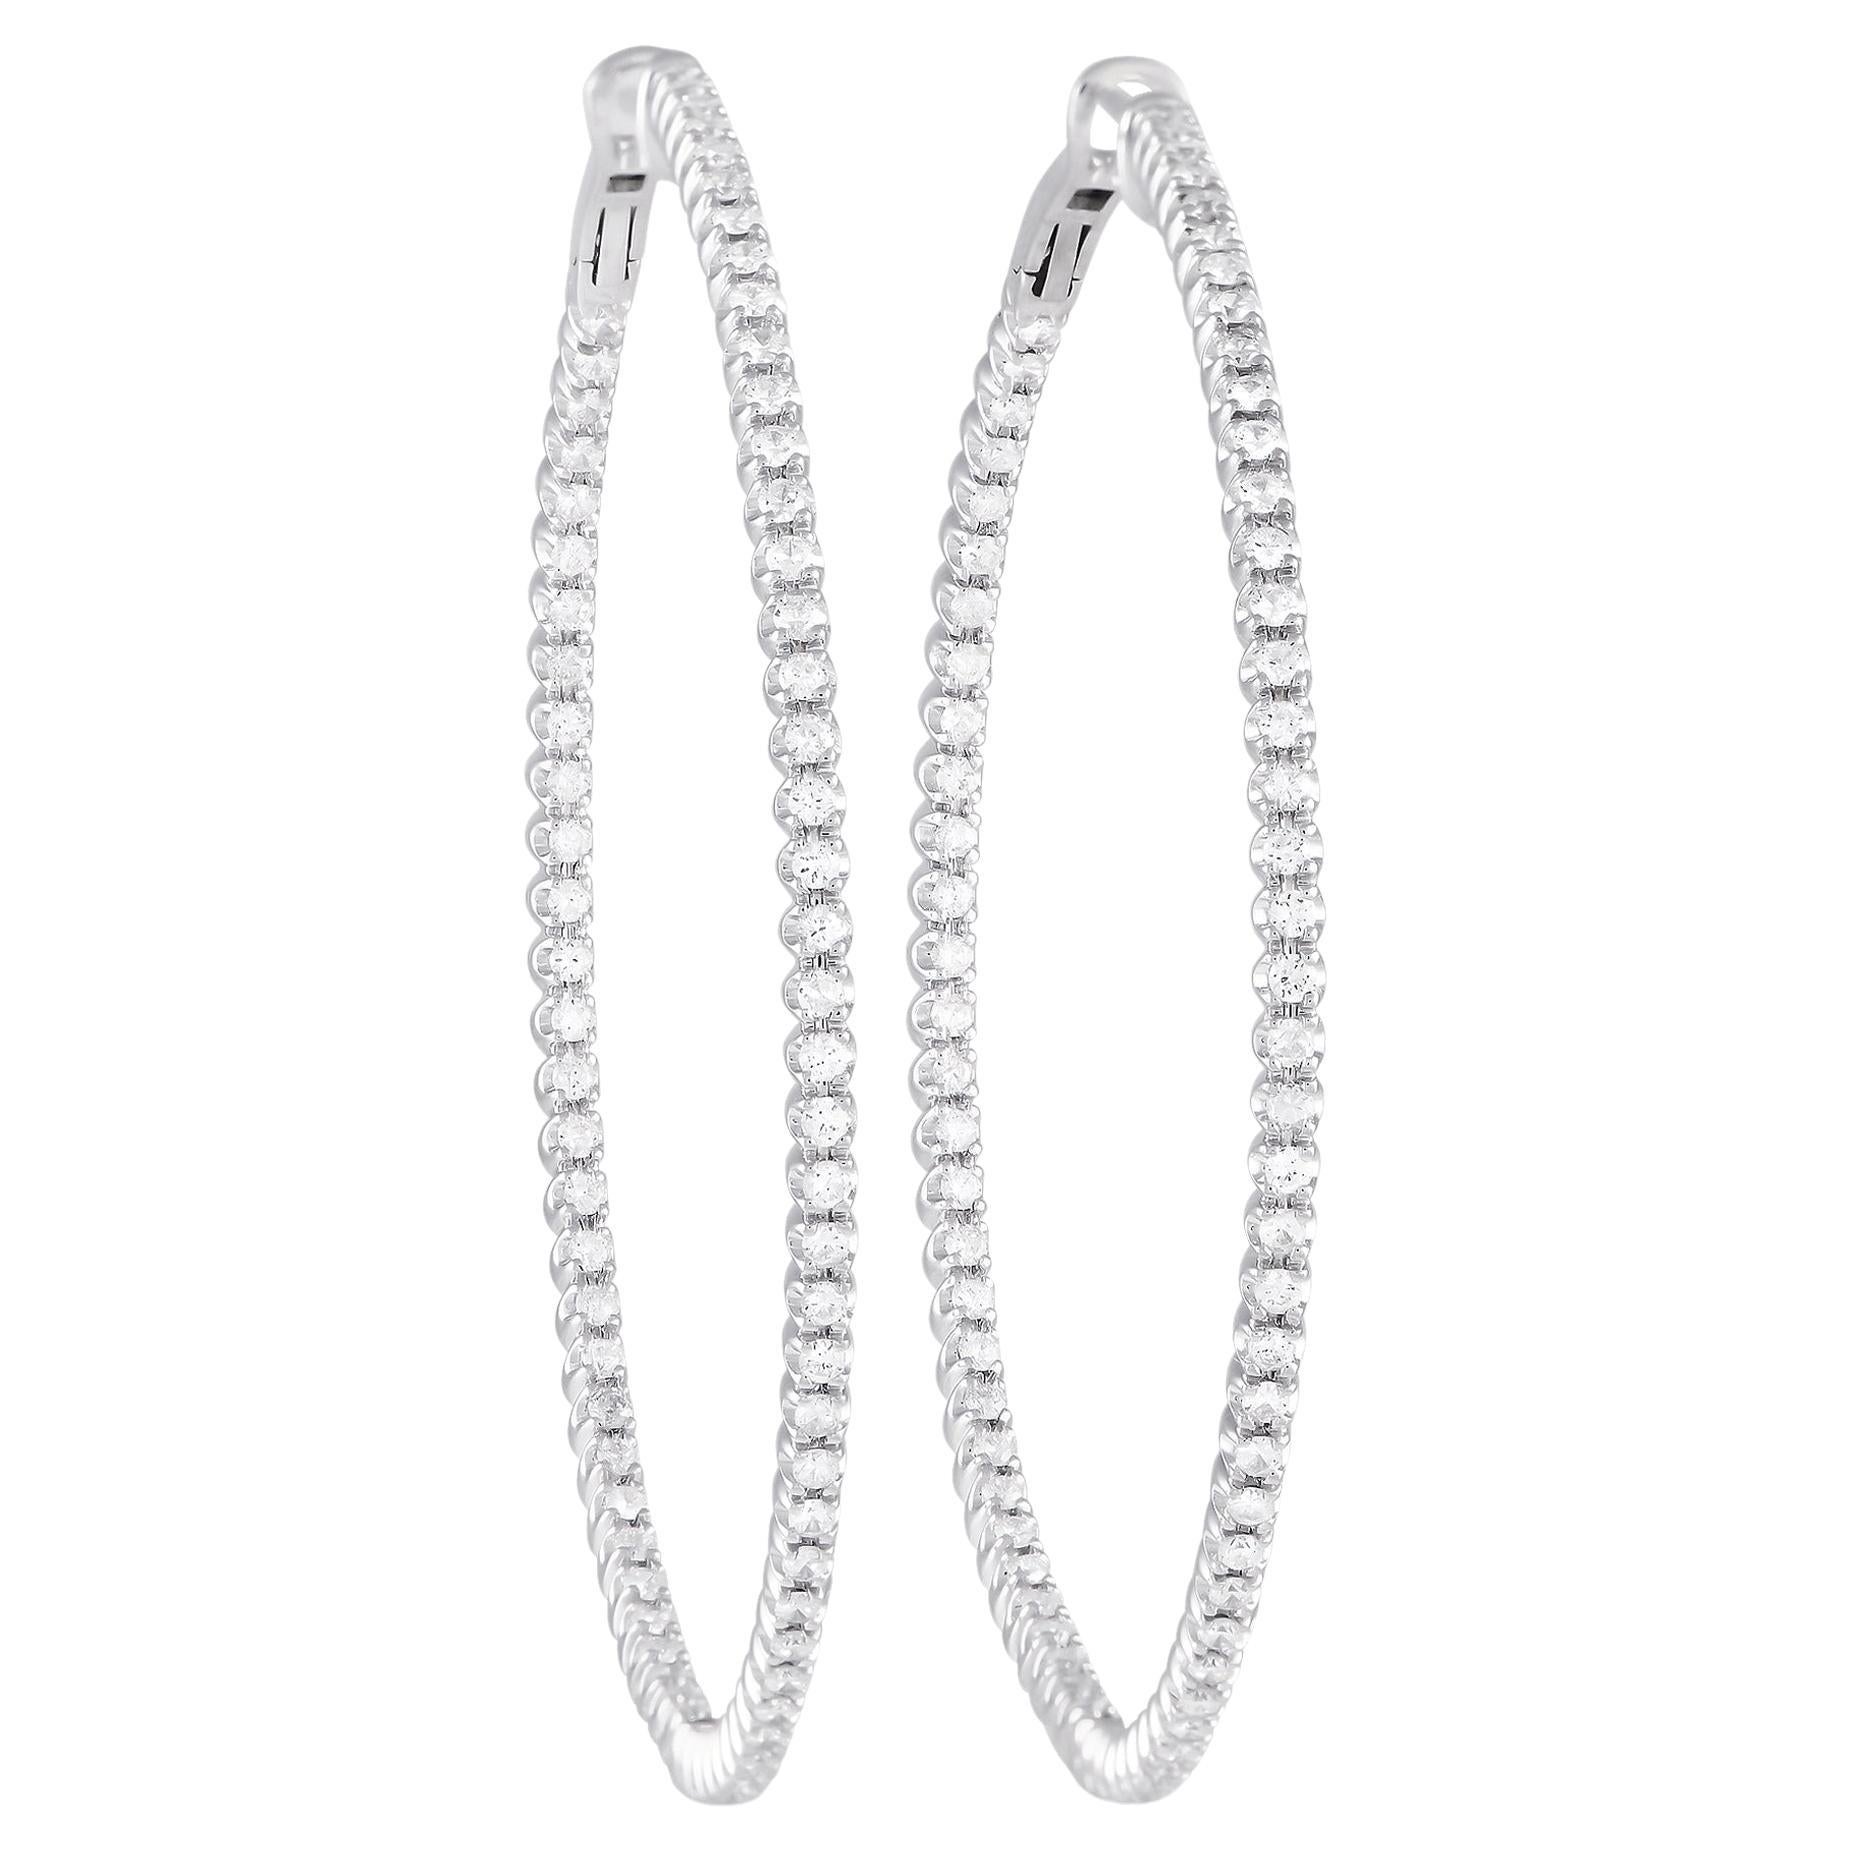 LB Exclusive 14K White Gold 1.70ct Diamond Inisde-Out Hoop Earrings MF05-101223 For Sale